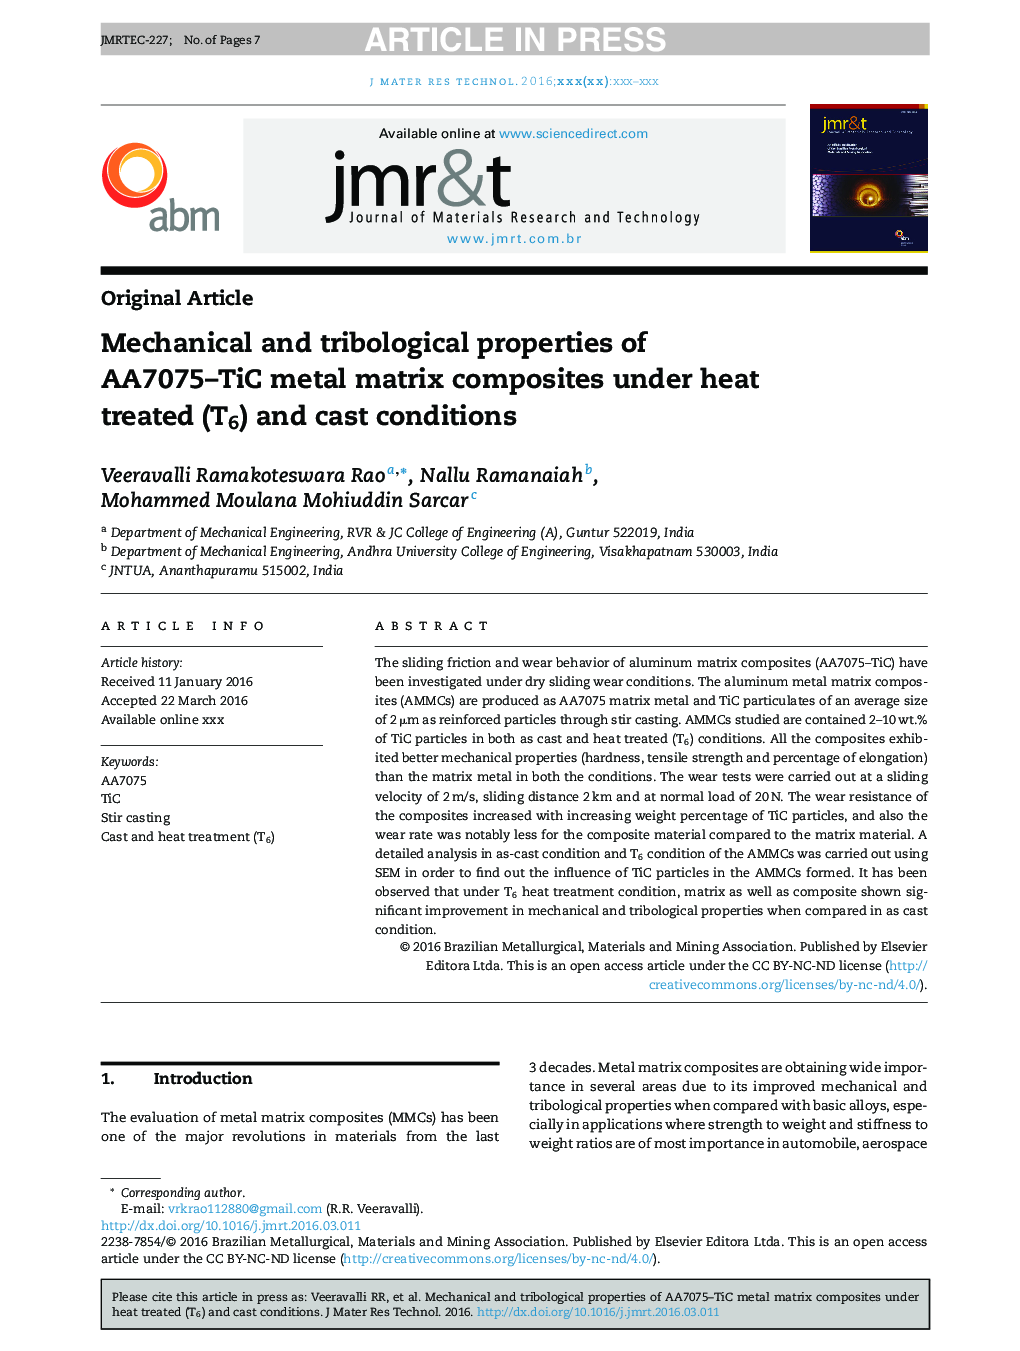 Mechanical and tribological properties of AA7075-TiC metal matrix composites under heat treated (T6) and cast conditions